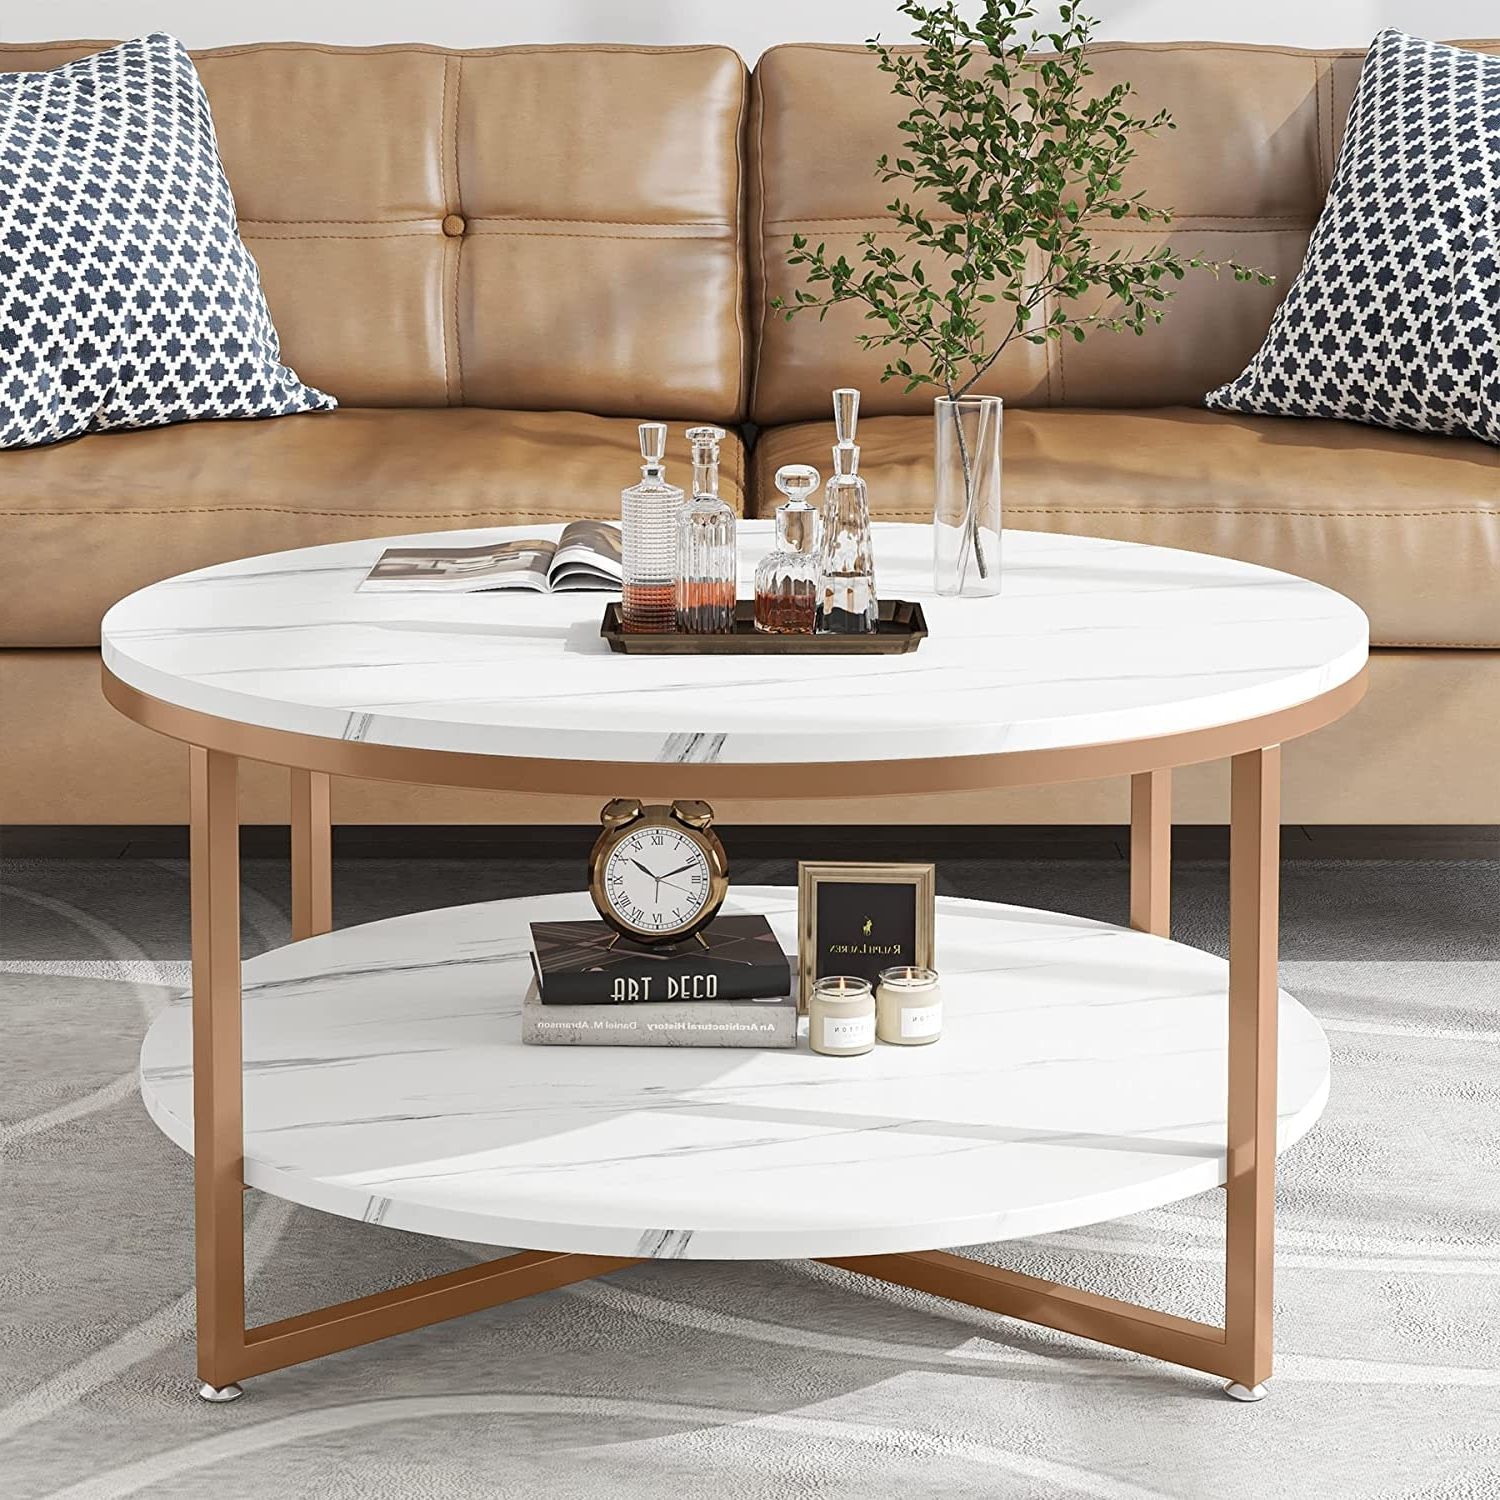 Trendy Two Tier Round Faux Marble Modern Coffee Table With Metal Legs And Open  Storage Shelf For Living Room, White Gold – Bed Bath & Beyond – 37593828 With Regard To Modern Round Faux Marble Coffee Tables (Photo 2 of 10)